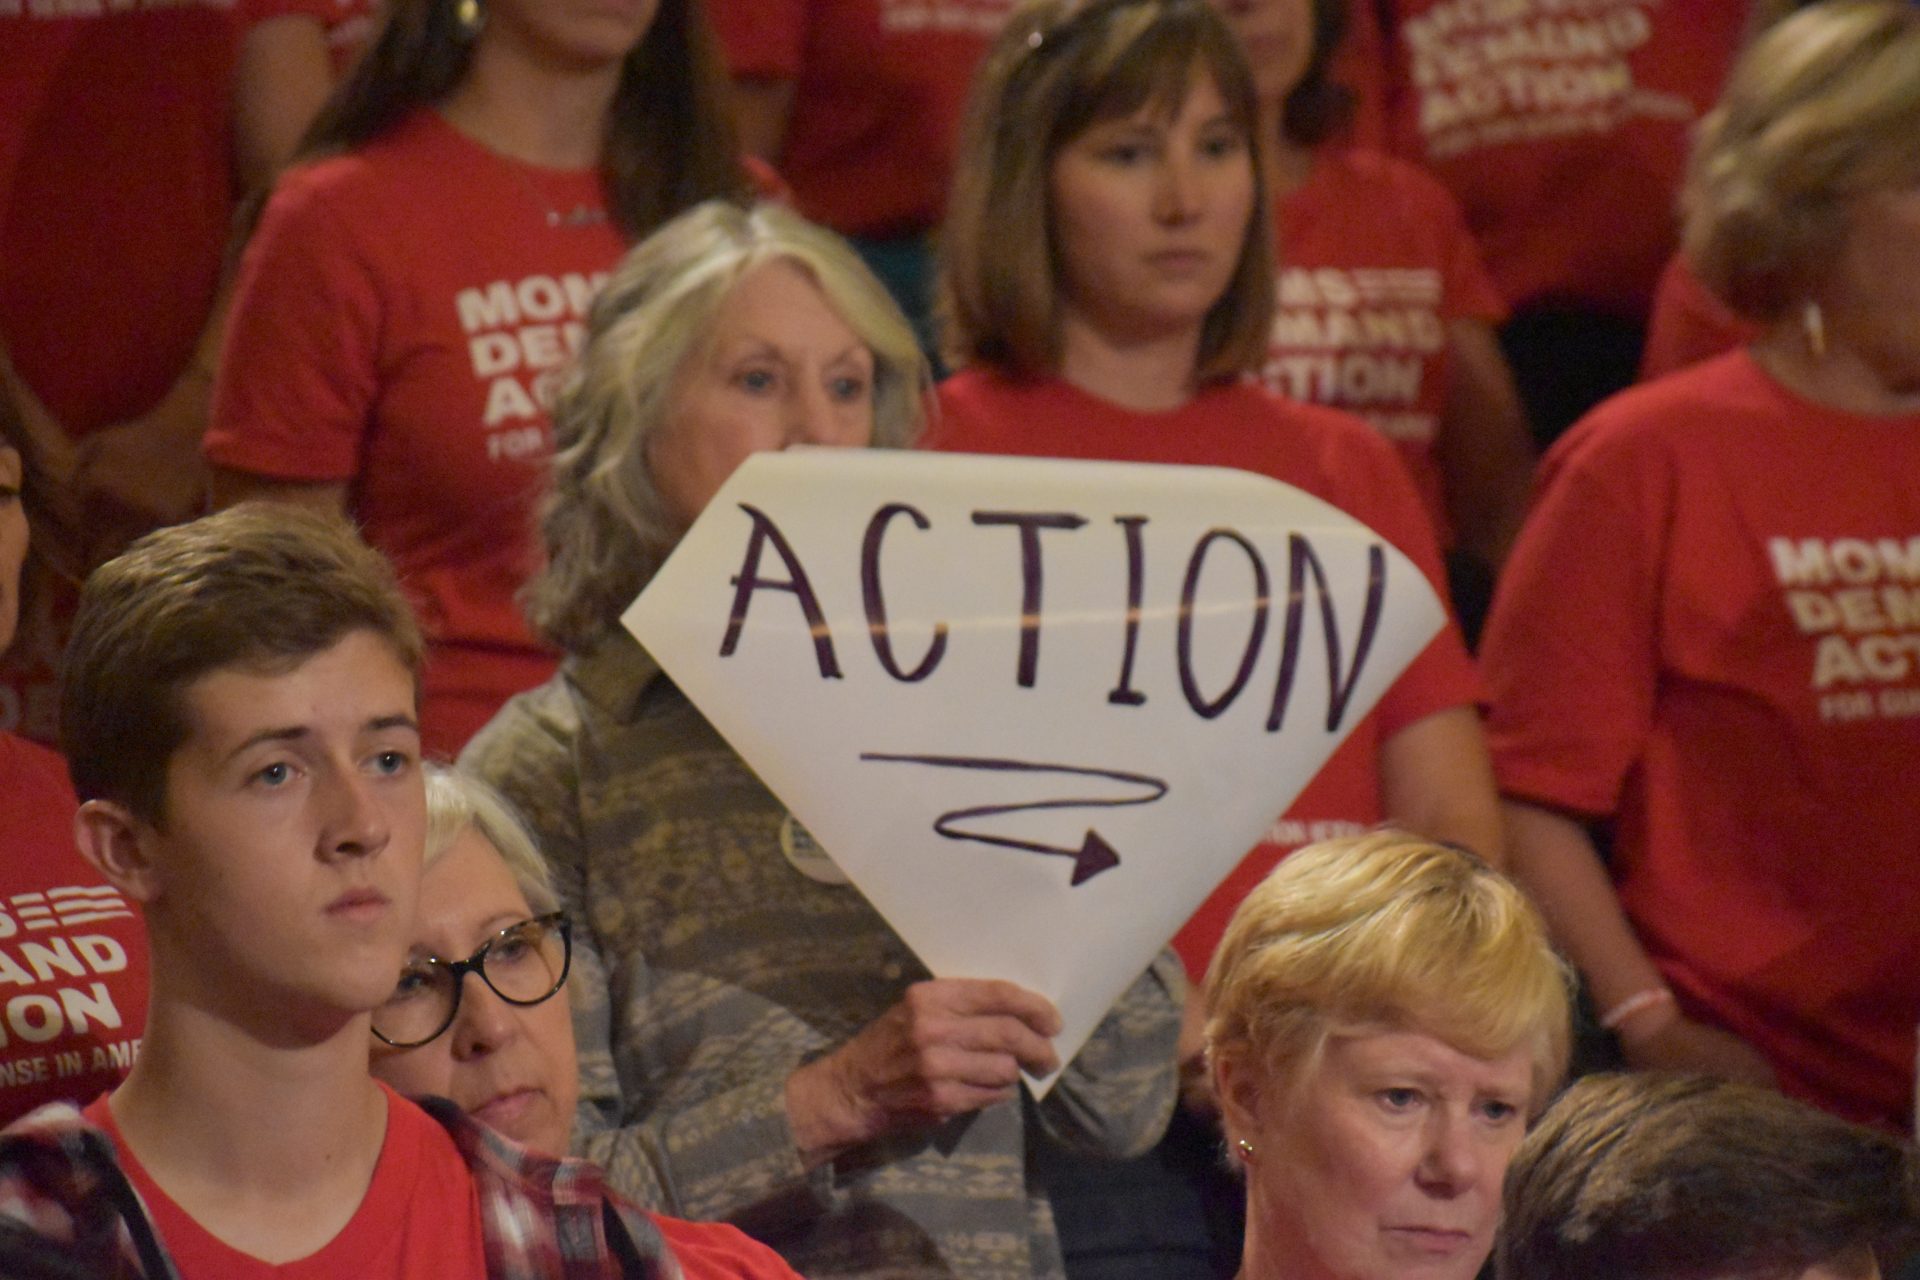 A sign reads "ACTION" during a rally in support of extreme risk protection orders in Harrisburg on Sept. 17, 2019 in the Pennsylvania Capitol.